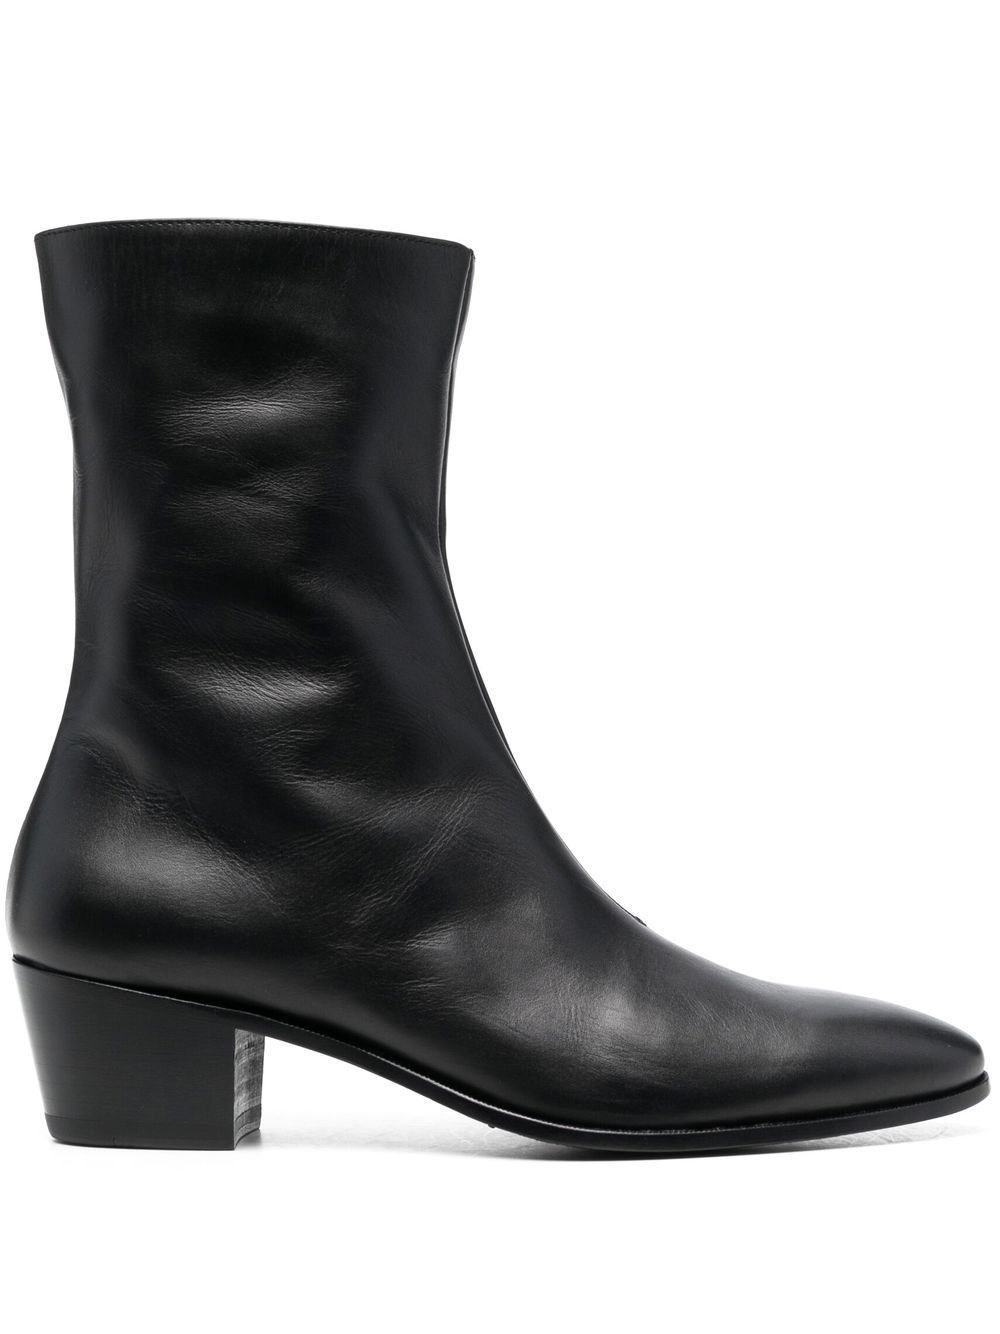 RHUDE pointed ankle boots - Black von RHUDE